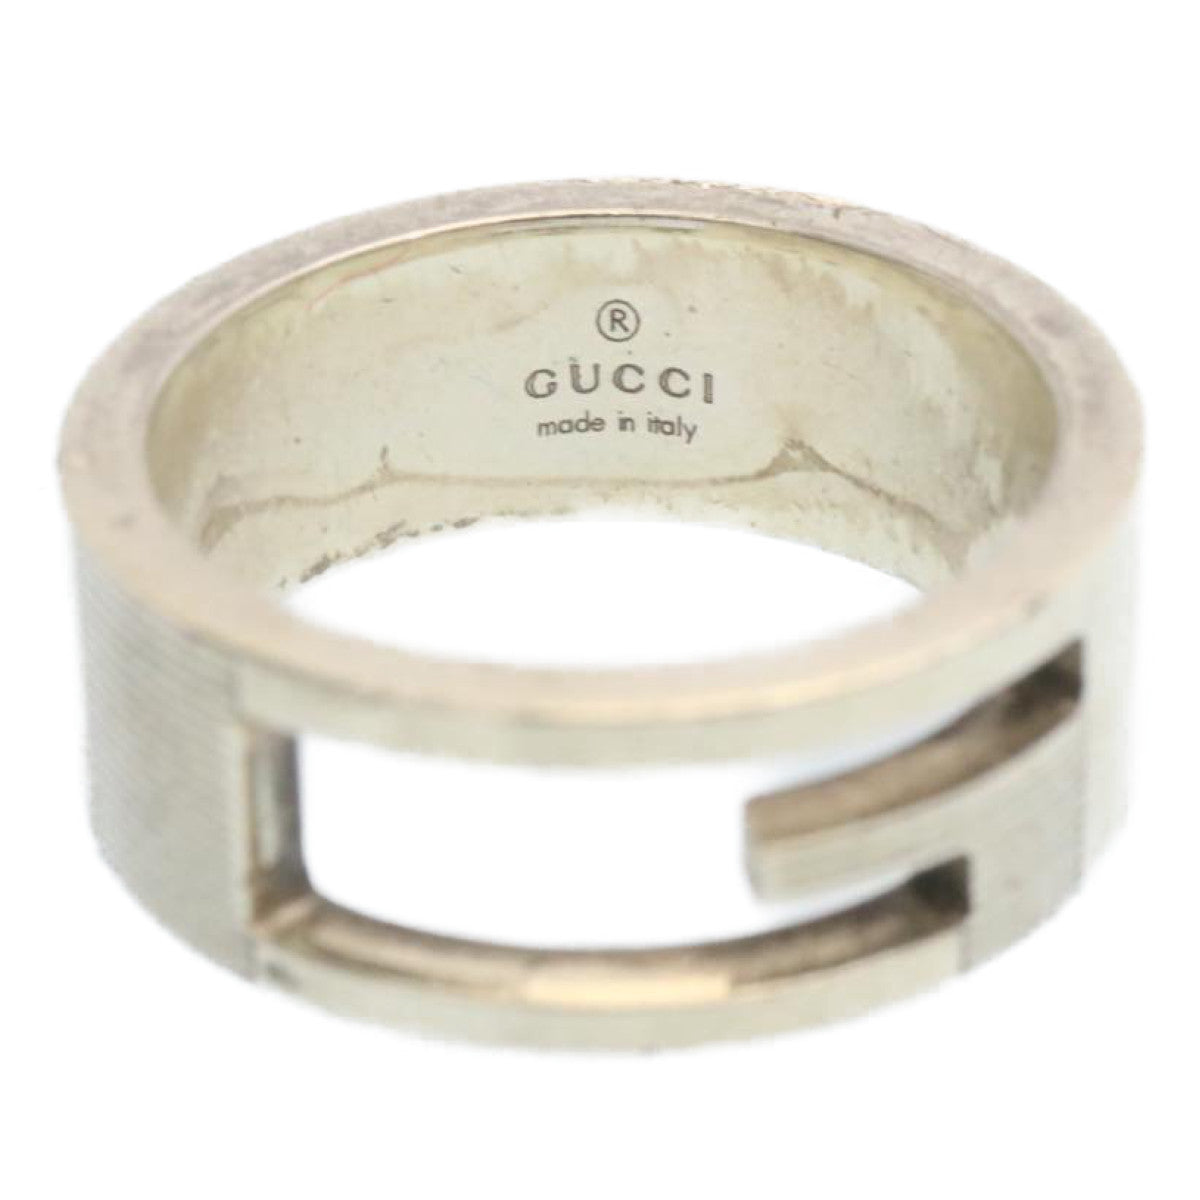 GUCCI Ring 2 Set size 7 and 16 Silver Auth am2085g